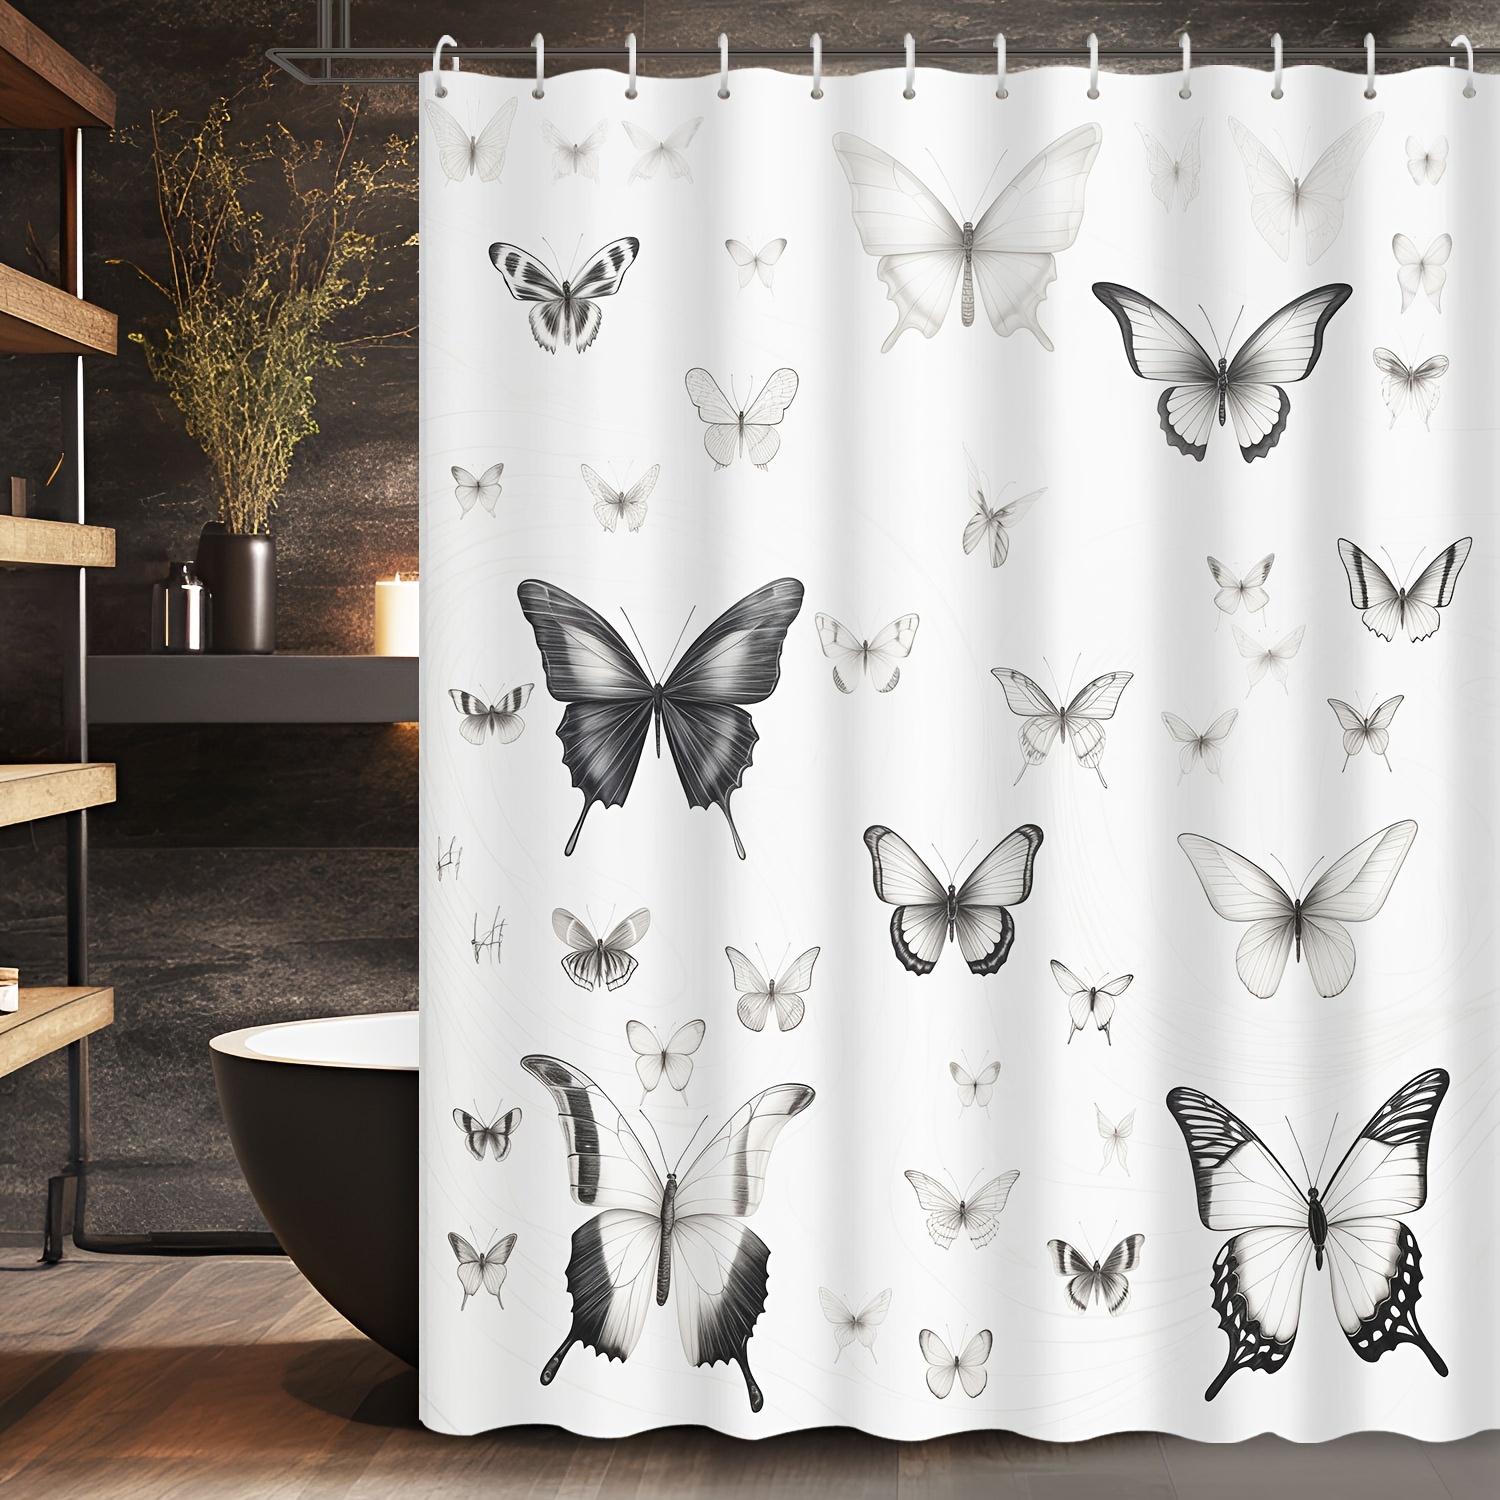 

Chic Black & White Butterfly Print Shower Curtain - Waterproof, Machine Washable With Hooks Included - Perfect For Bathroom Decor, 72x72 Inches